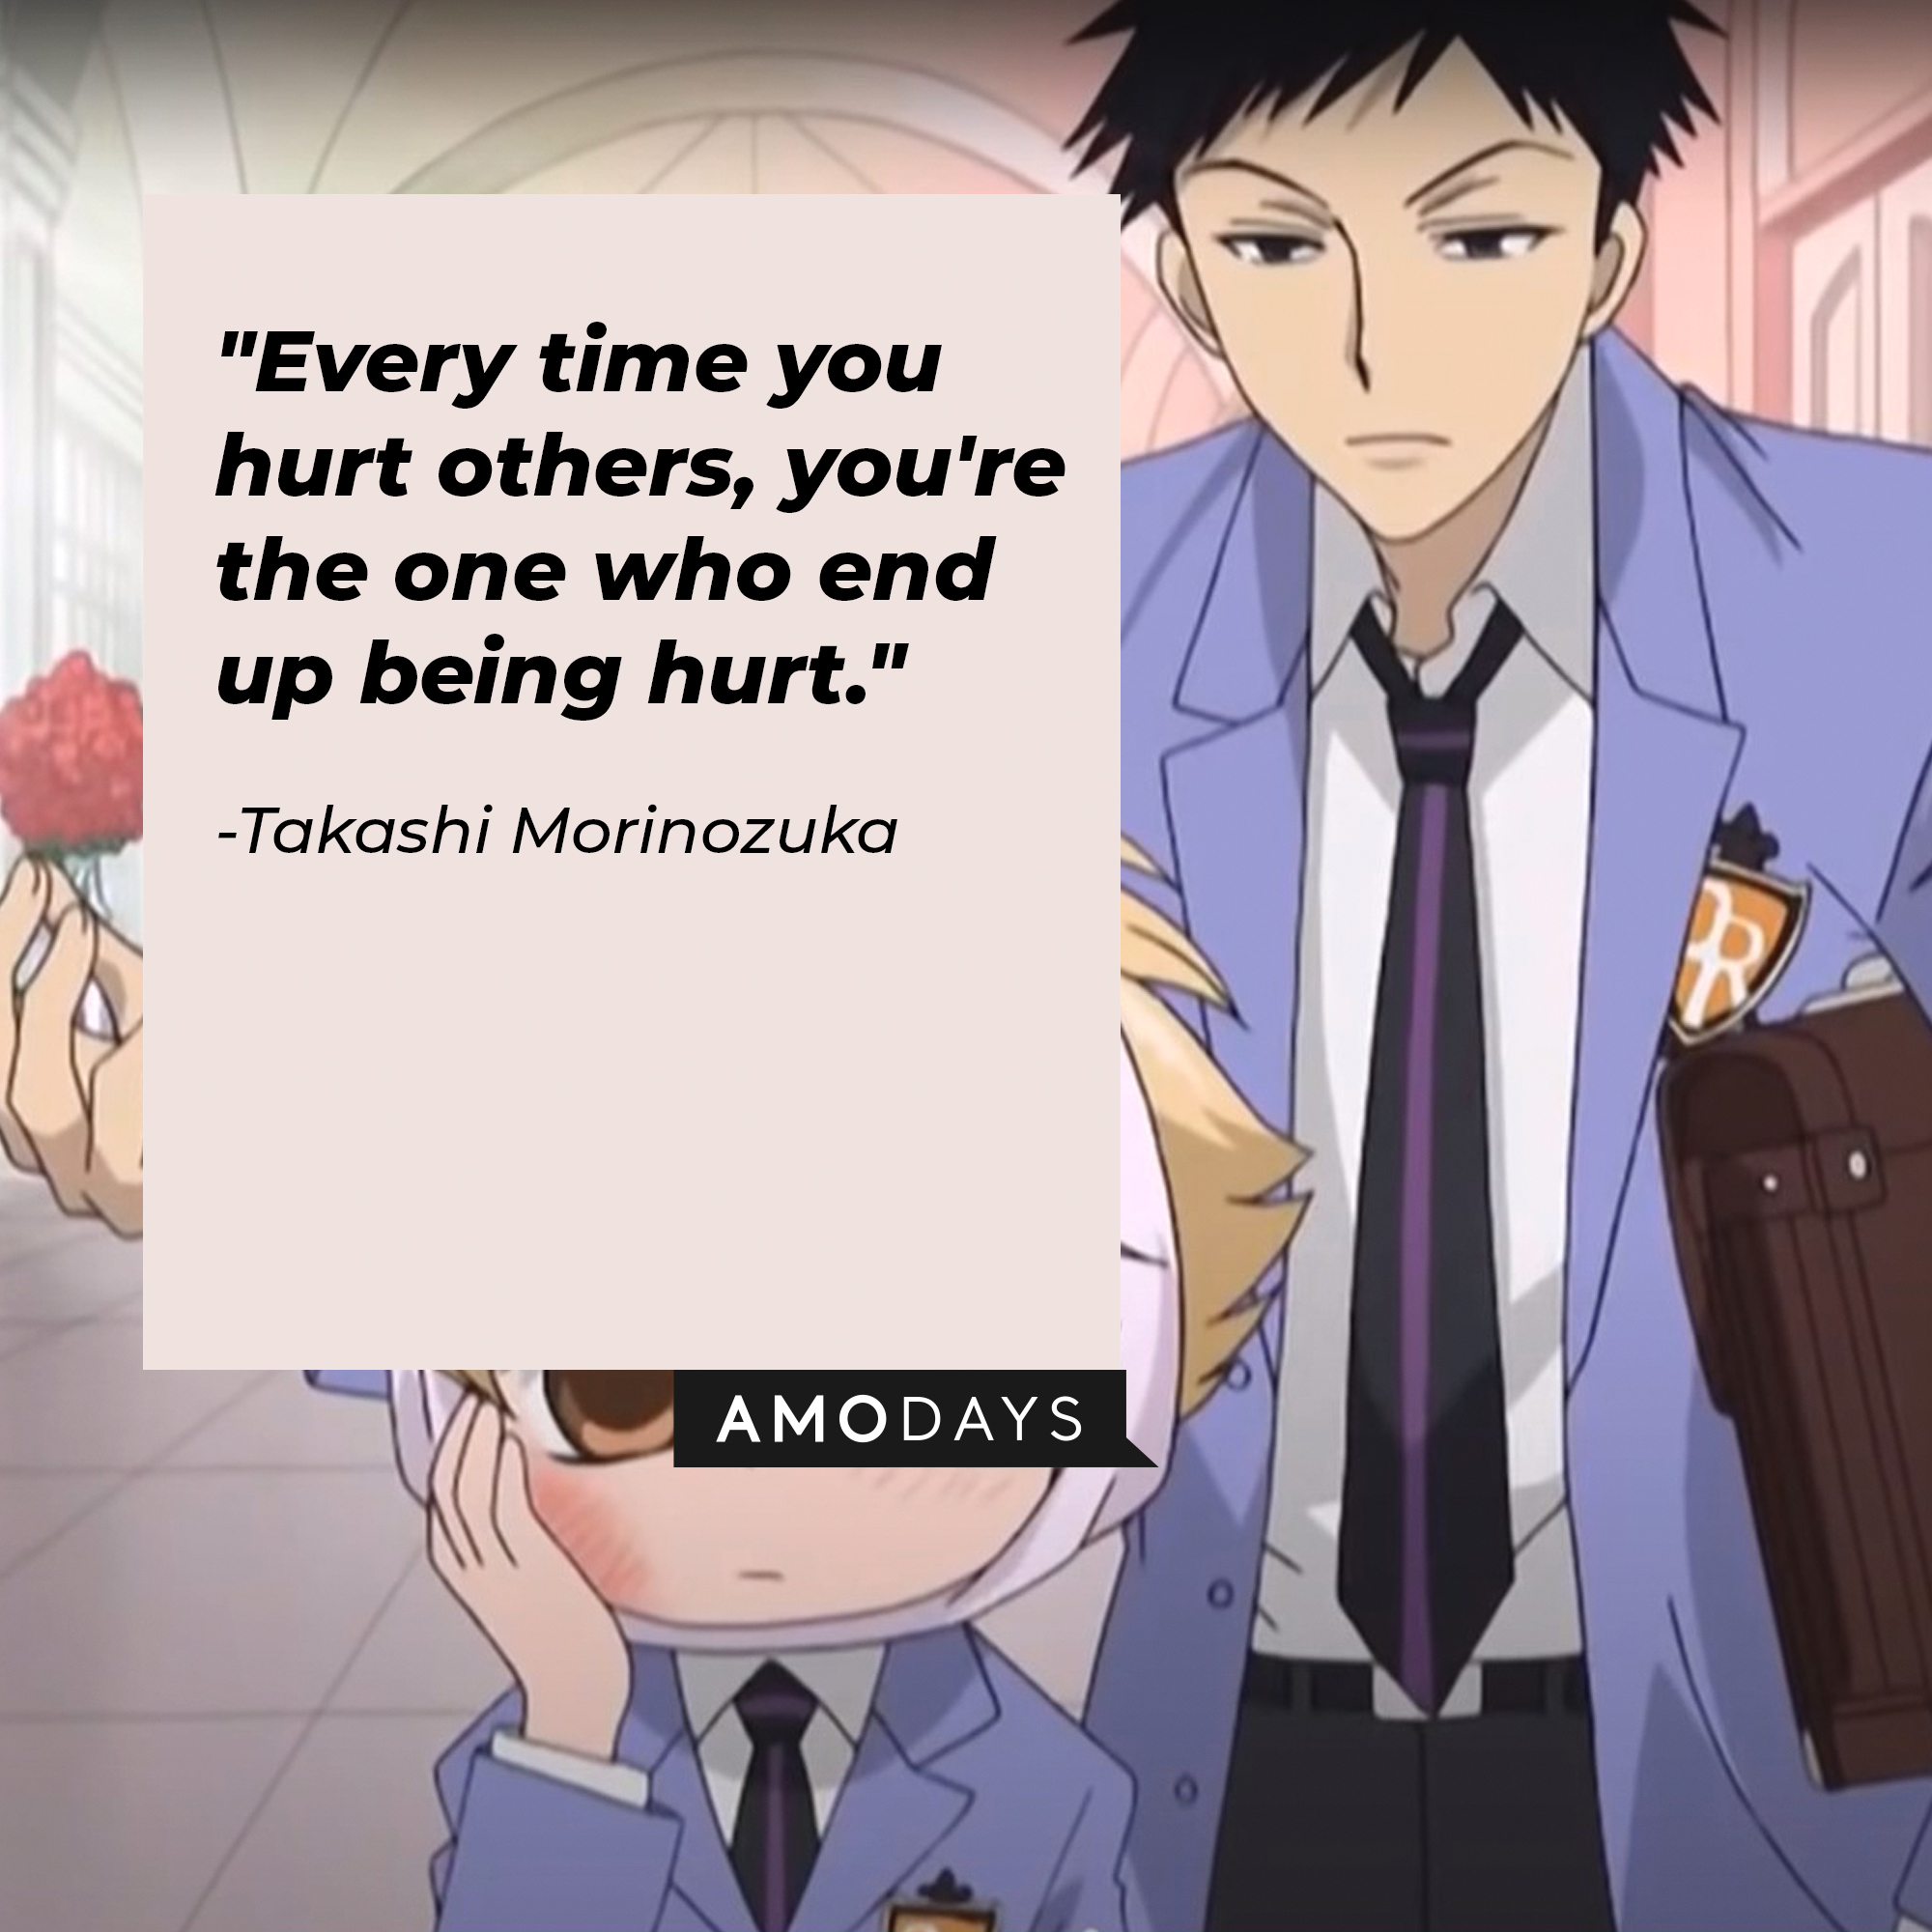 Takashi Morinozuka's quote: "Every time you hurt others, you're the one who end up being hurt." | Source: Facebook.com/theouranhostclub